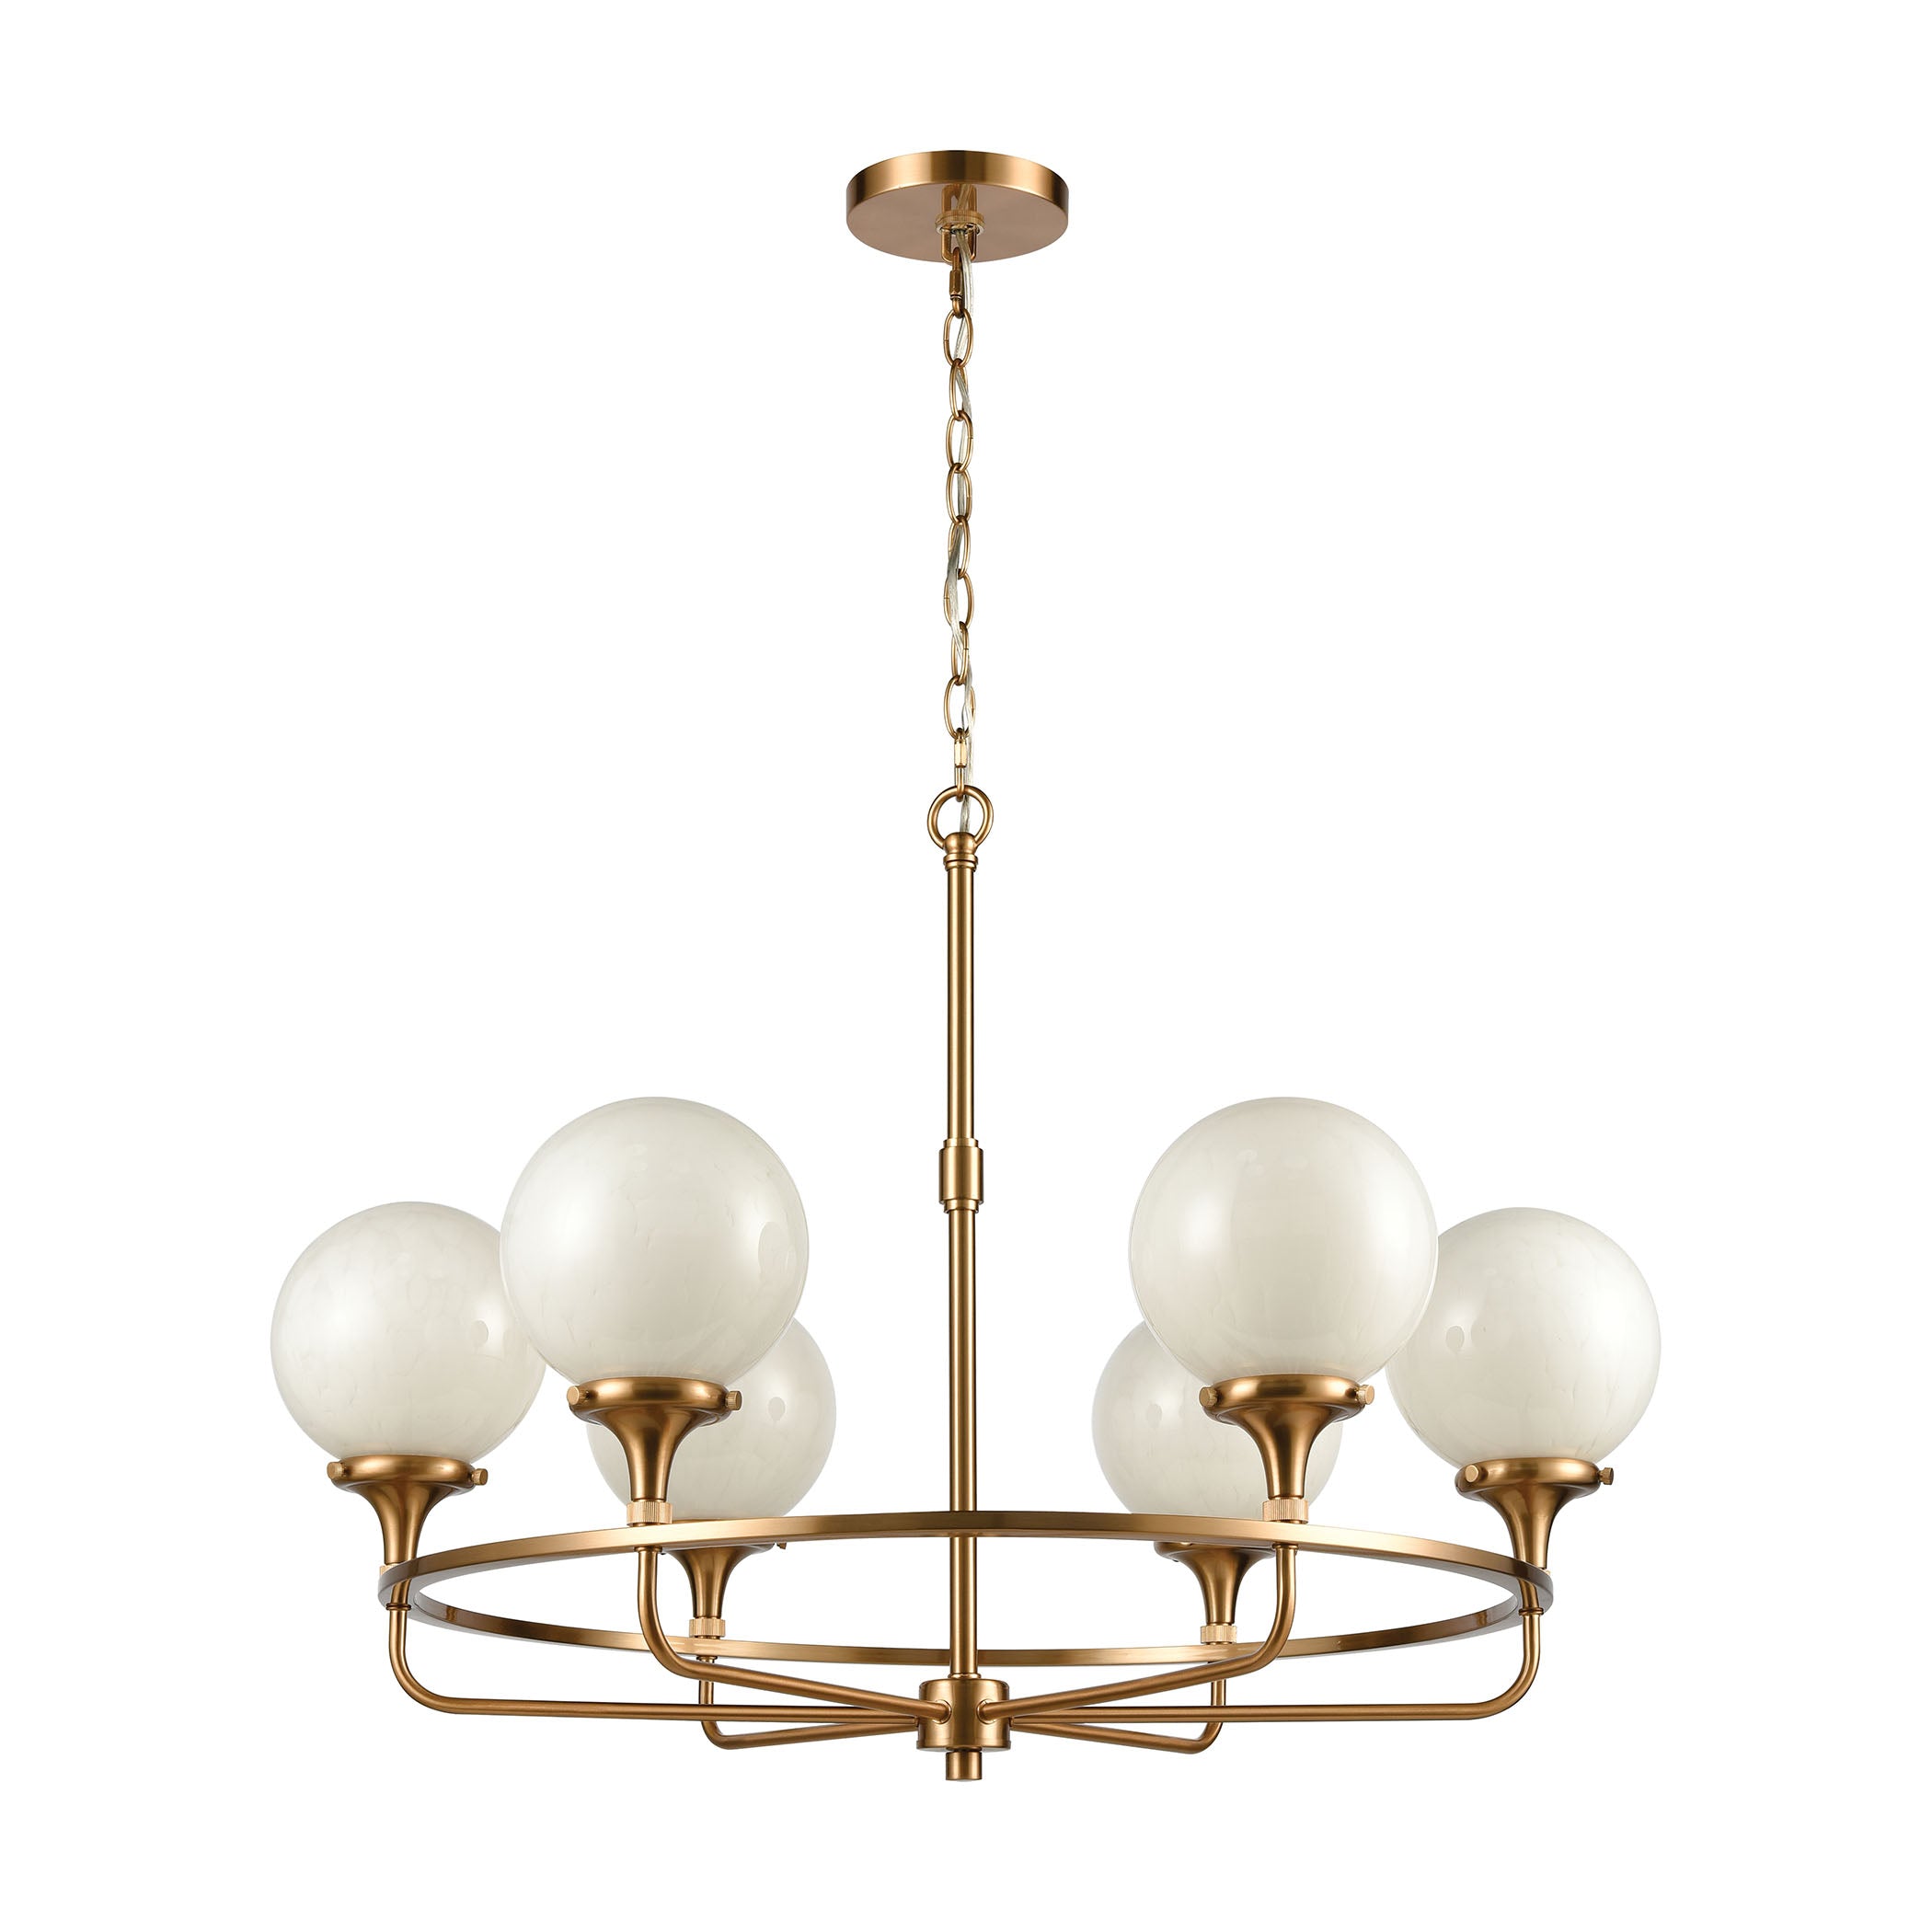 ELK Lighting 30146/6 Beverly Hills 6-Light Chandelier in Satin Brass with White Feathered Glass